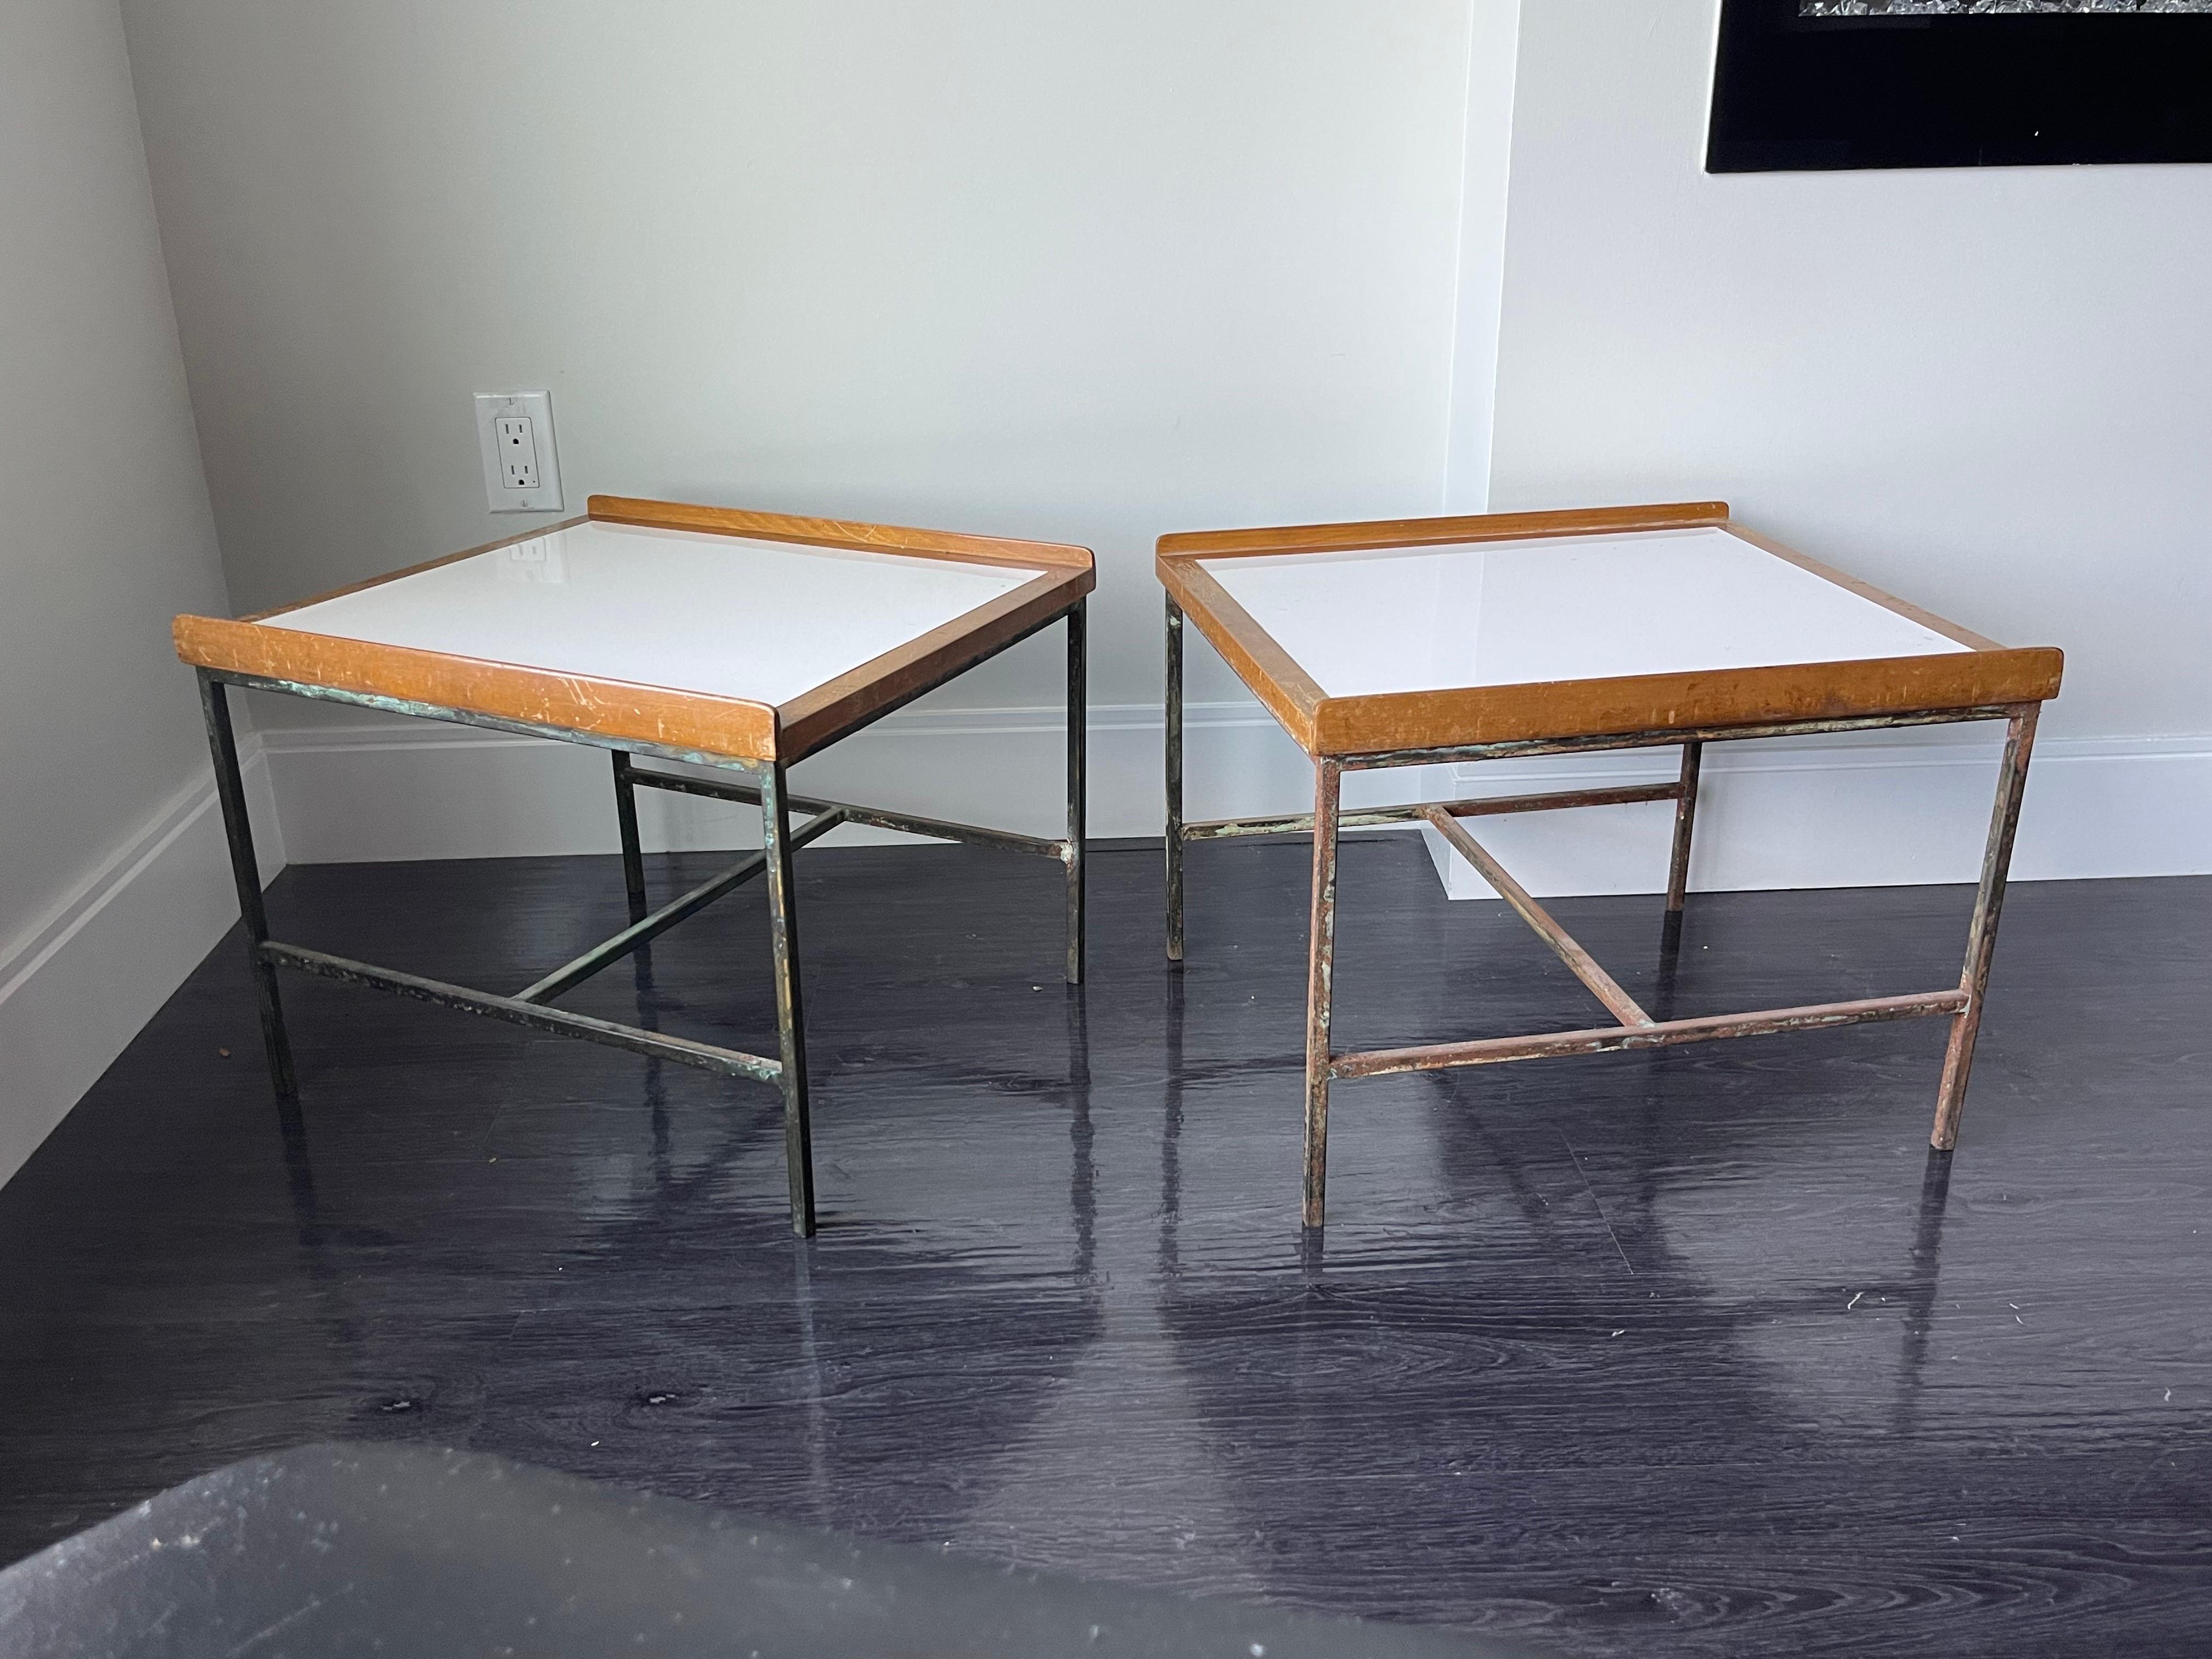 Rare set of midcentury patinated architectural diminutive side tables after Paul McCobb and Harvey Probber. These also look like William Armbrister for Knoll. Very well made, with heavily patinated solid brass legs, showing decades of patina,